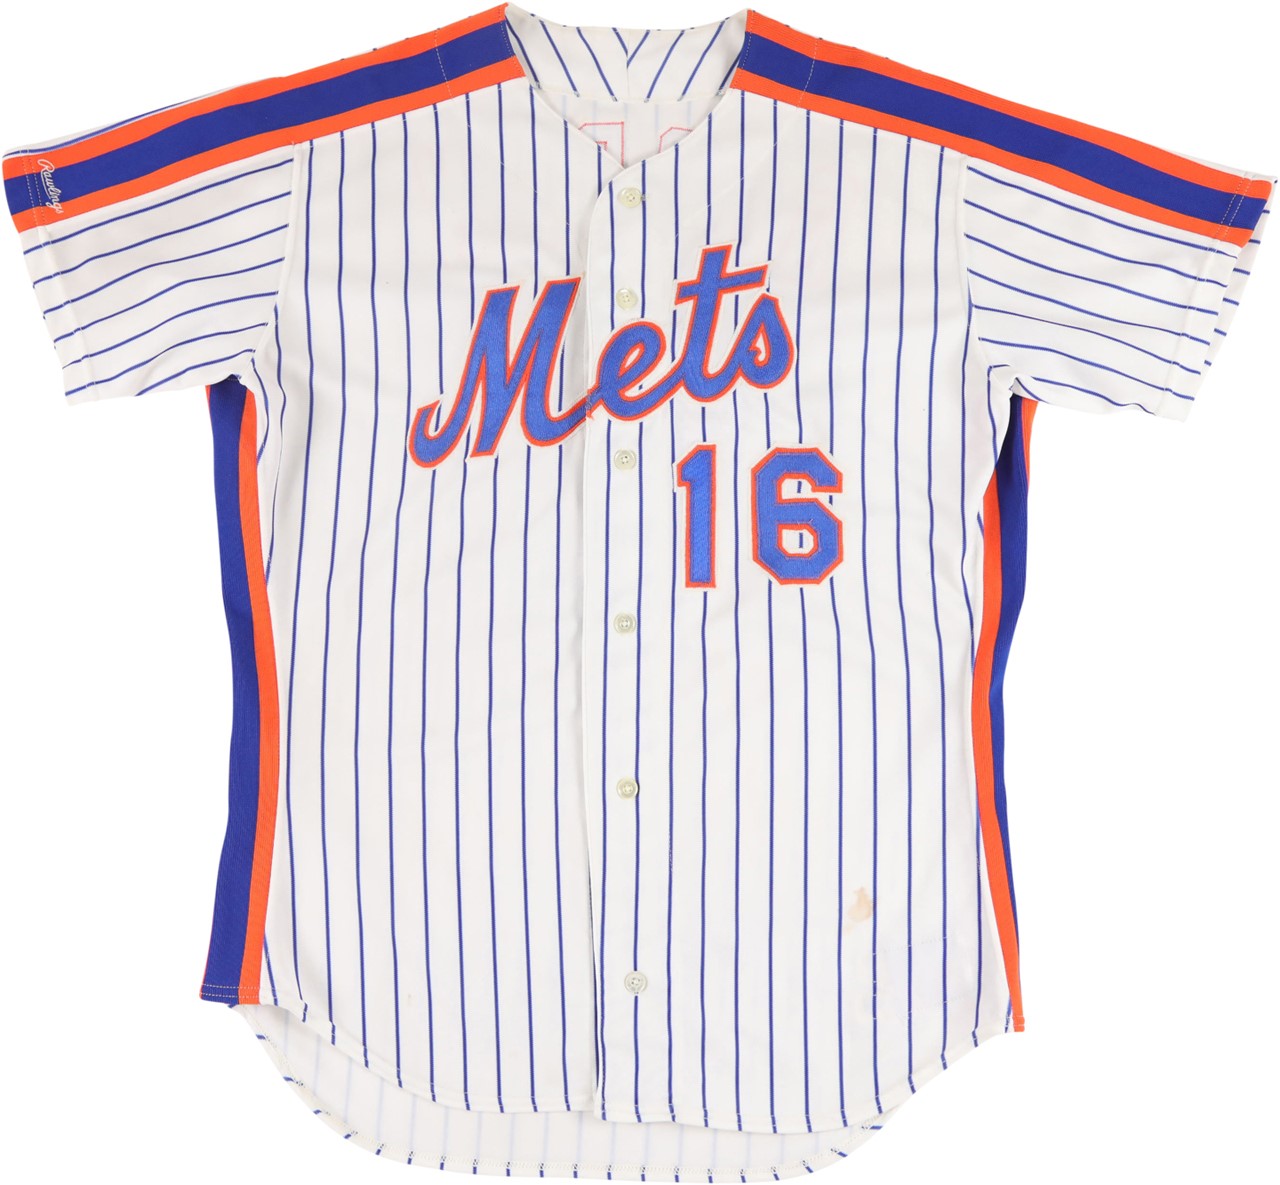 - 7/21/91 Dwight Gooden New York Mets Signed Game Worn Jersey - 10th Win of the Season and 2 RBI (Photo-Matched)